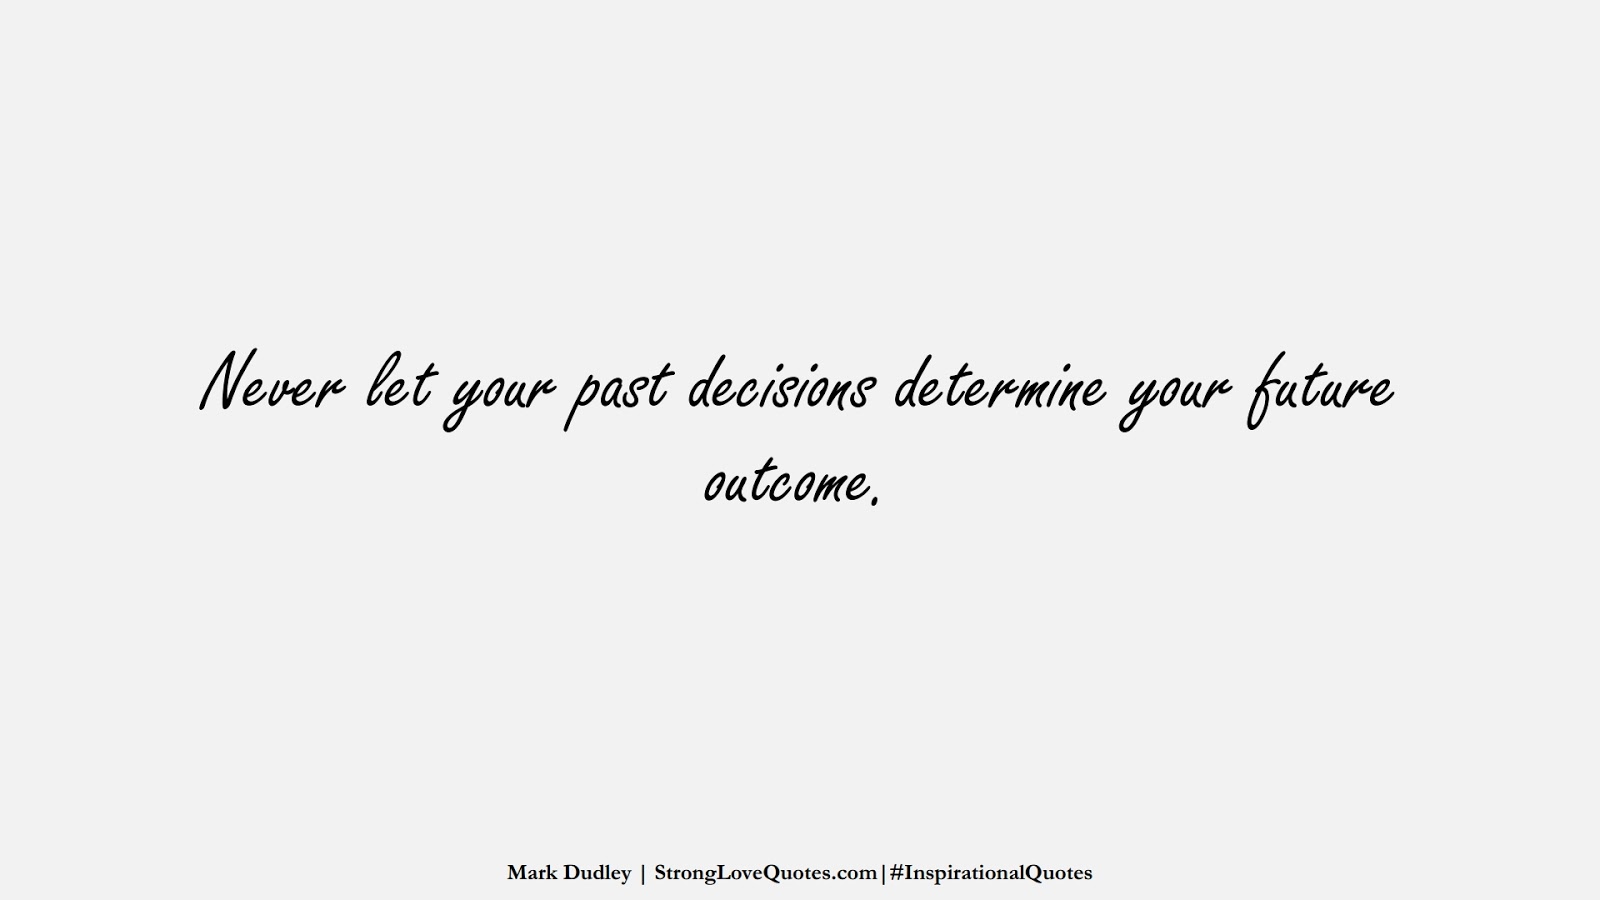 Never let your past decisions determine your future outcome. (Mark Dudley);  #InspirationalQuotes